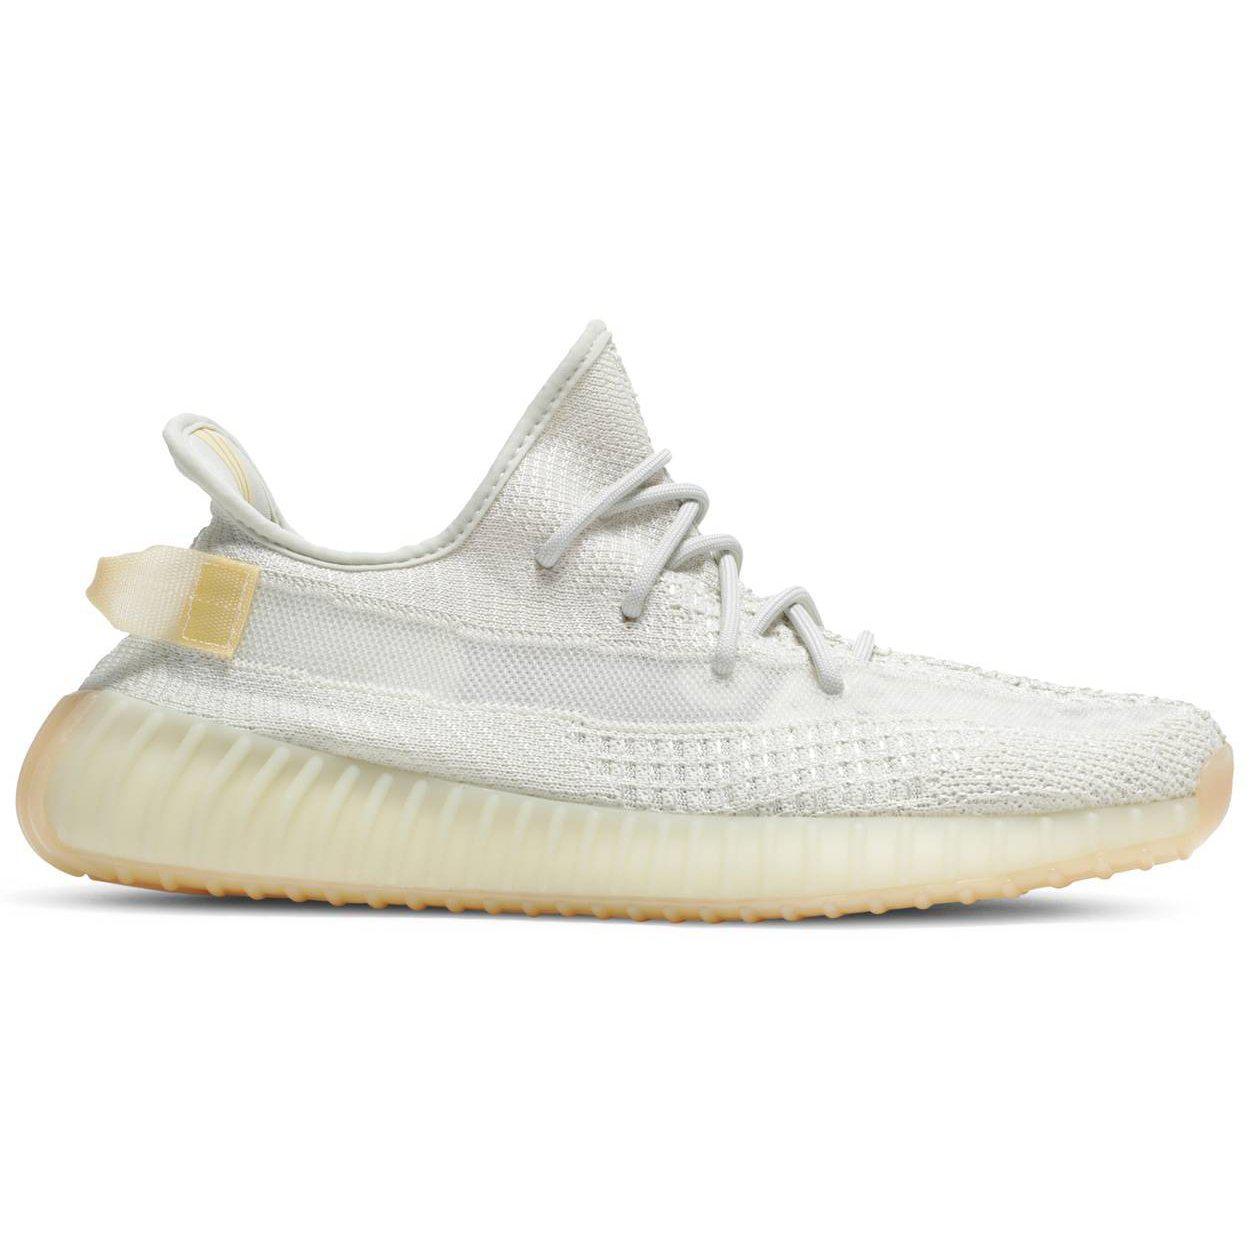 Adidas Yeezy Boost 350 V2 'Light' | Waves Never Die | Adidas | Sneakers